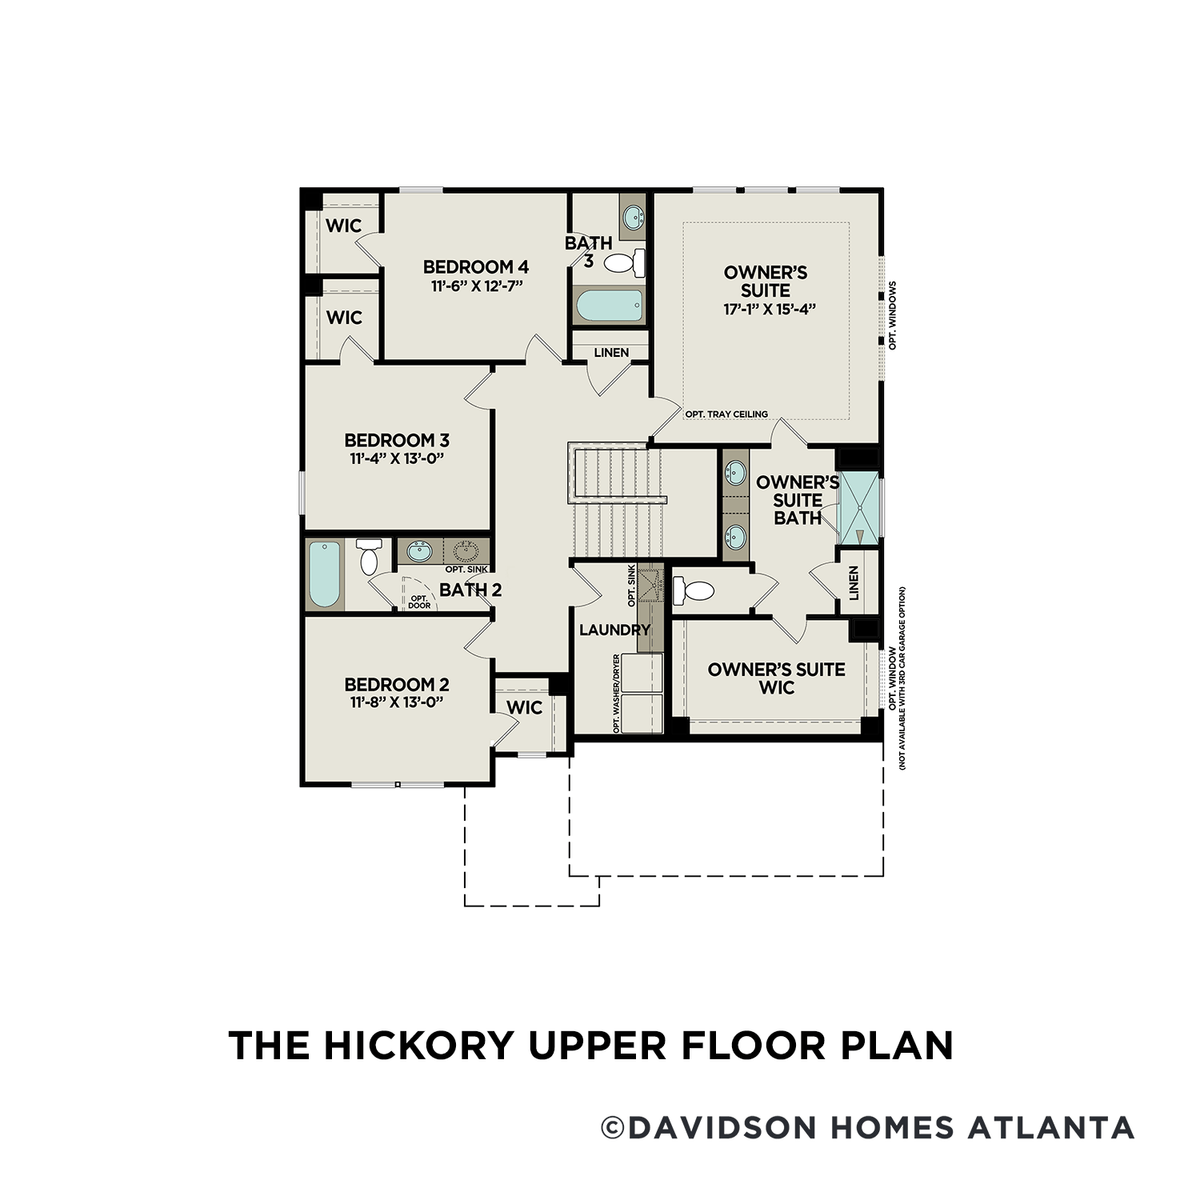 2 - The Hickory B- Unfinished Basement  floor plan layout for 45 Rolling Rock Way in Davidson Homes' Riverwood community.